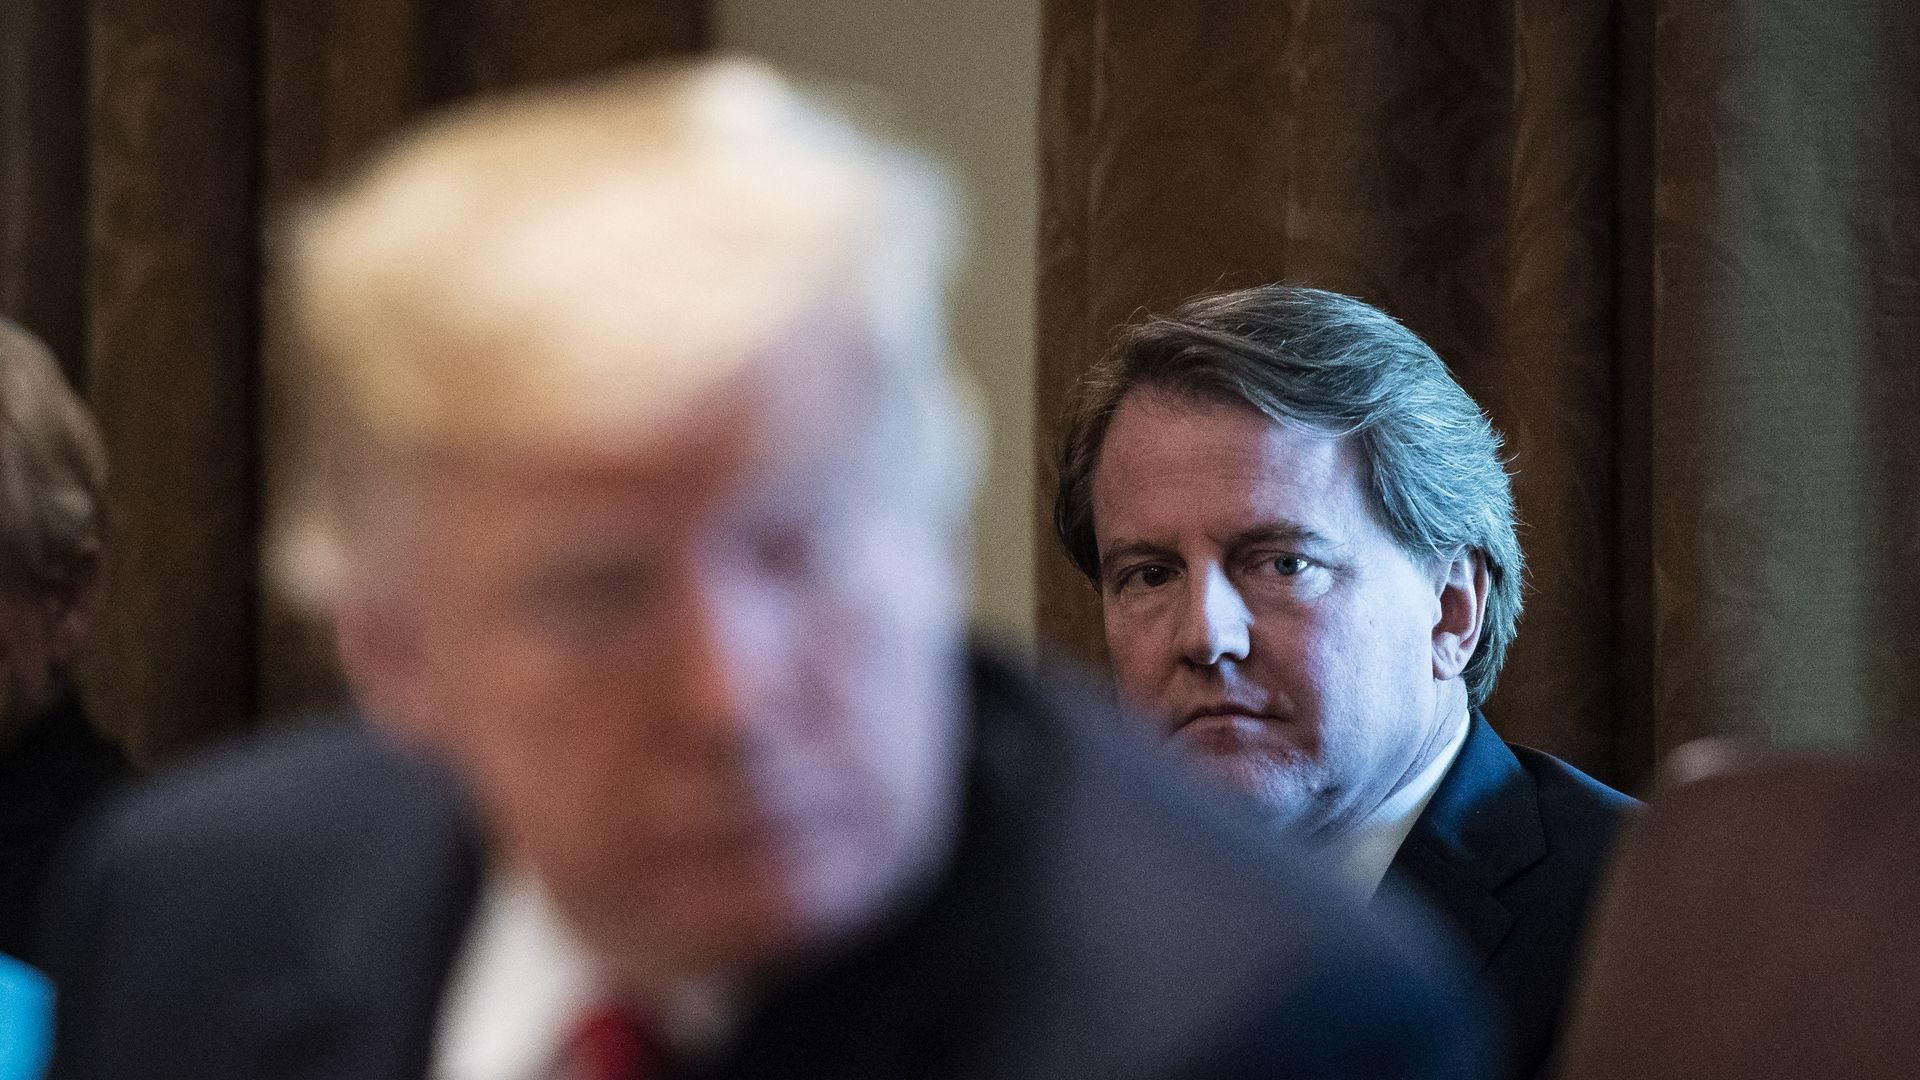 Don McGahn, the former White House lawyer, sitting behind Trump in a photograph